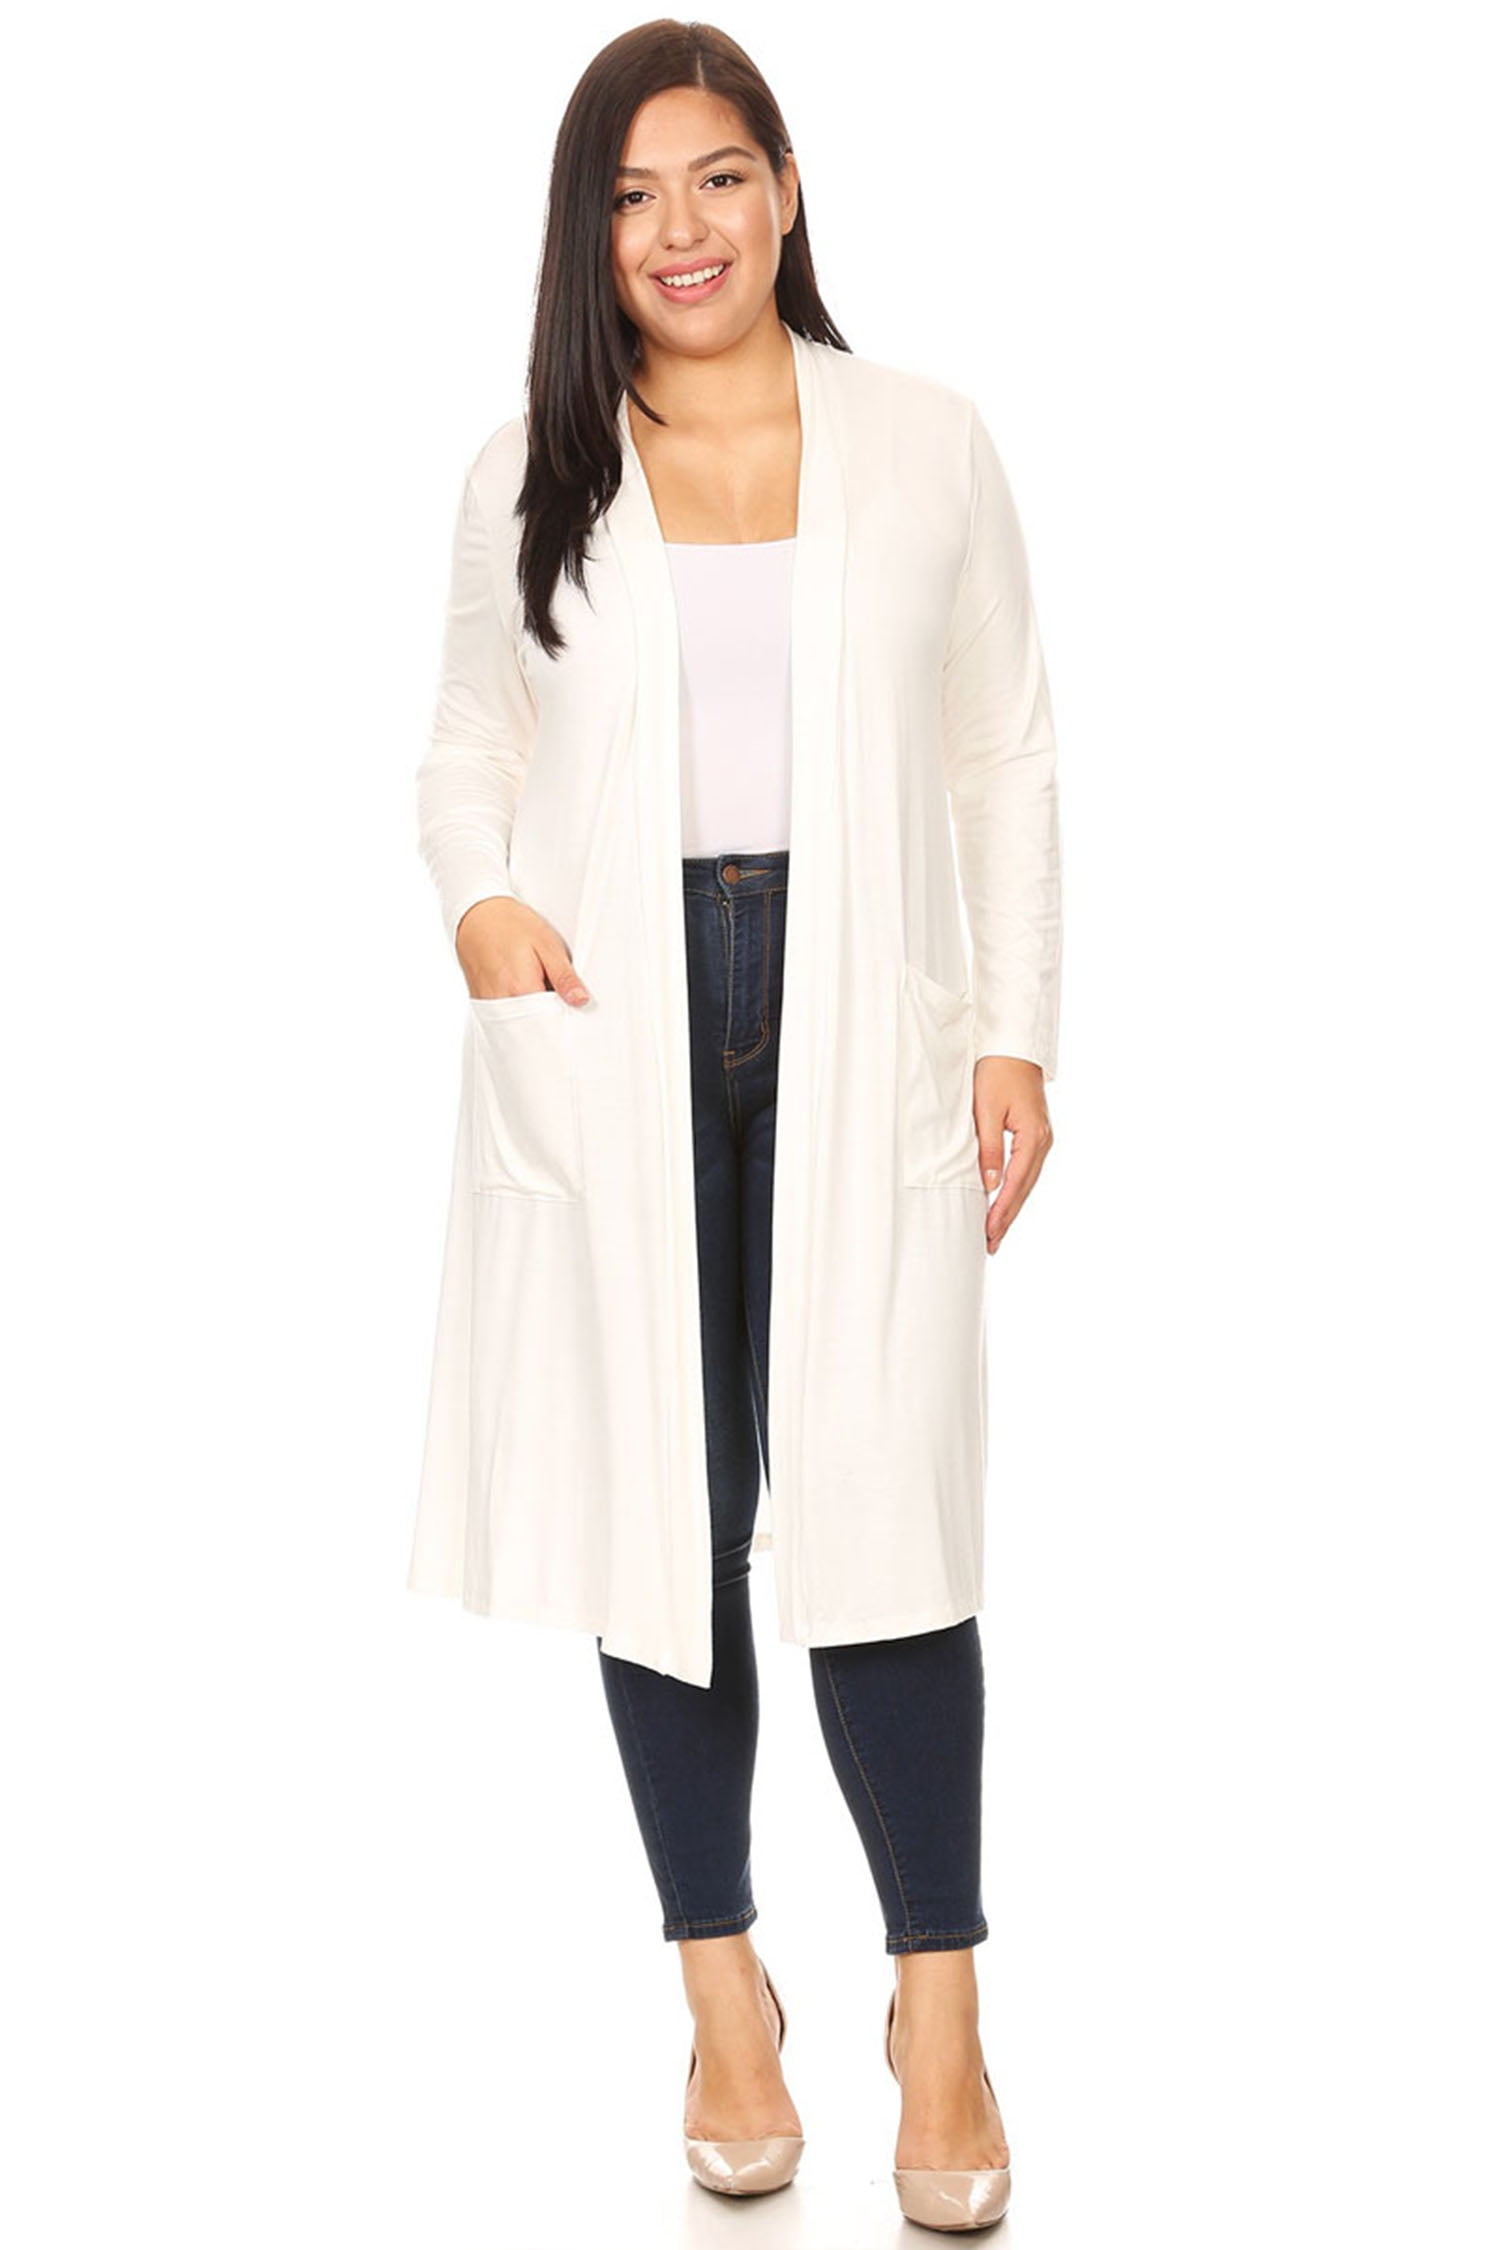 Women's Casual Plus Size Long Body Duster Cardigan with Pockets Made in ...